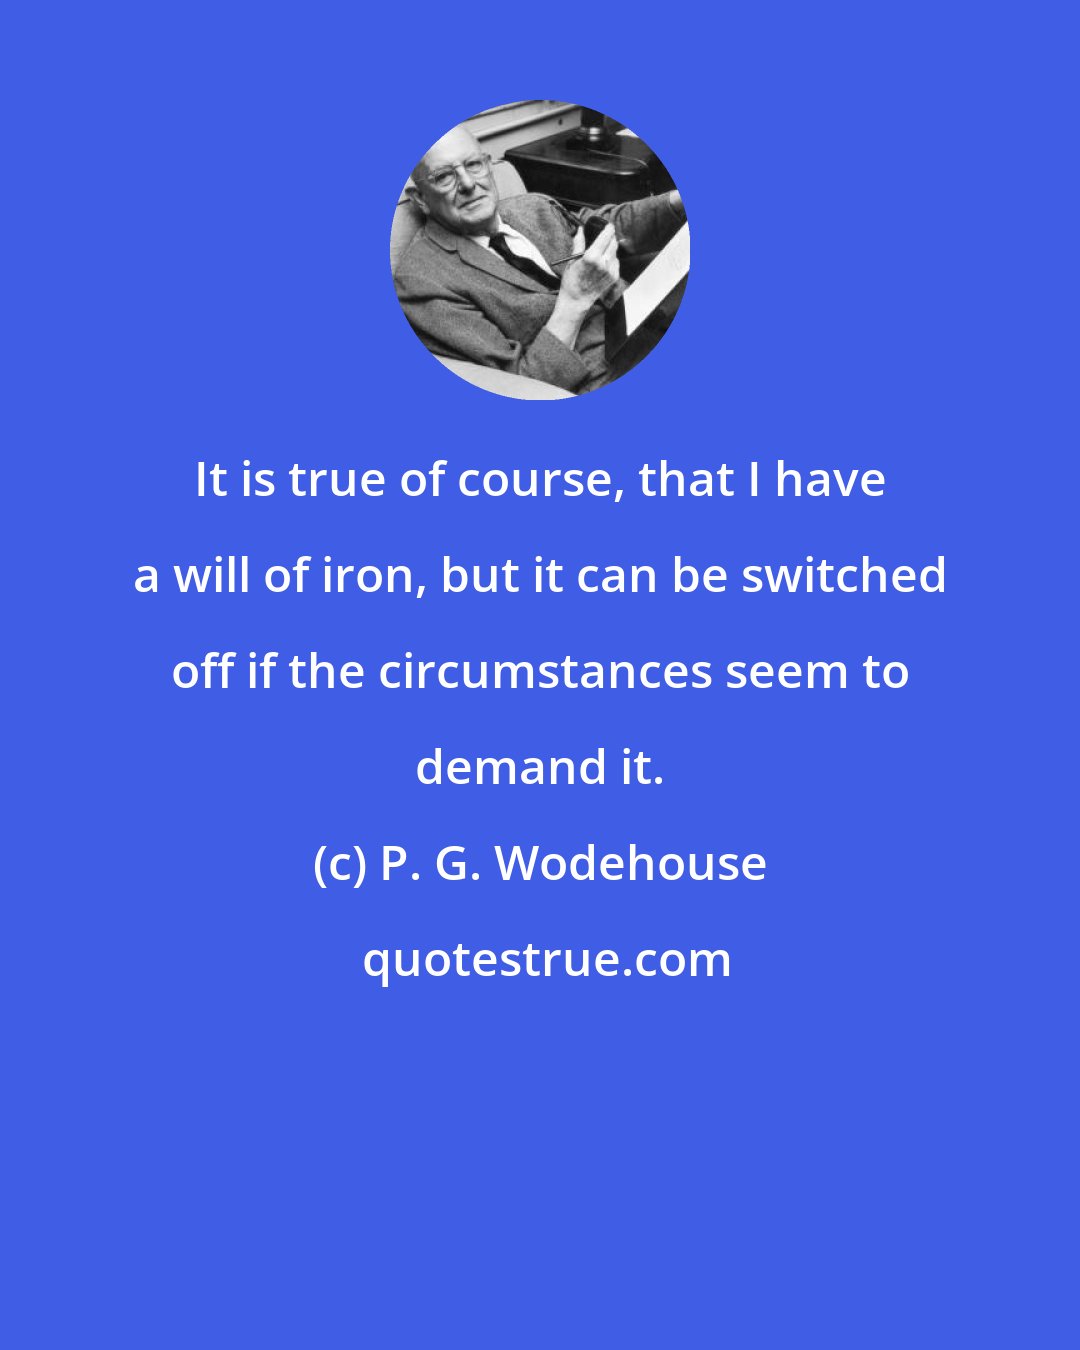 P. G. Wodehouse: It is true of course, that I have a will of iron, but it can be switched off if the circumstances seem to demand it.